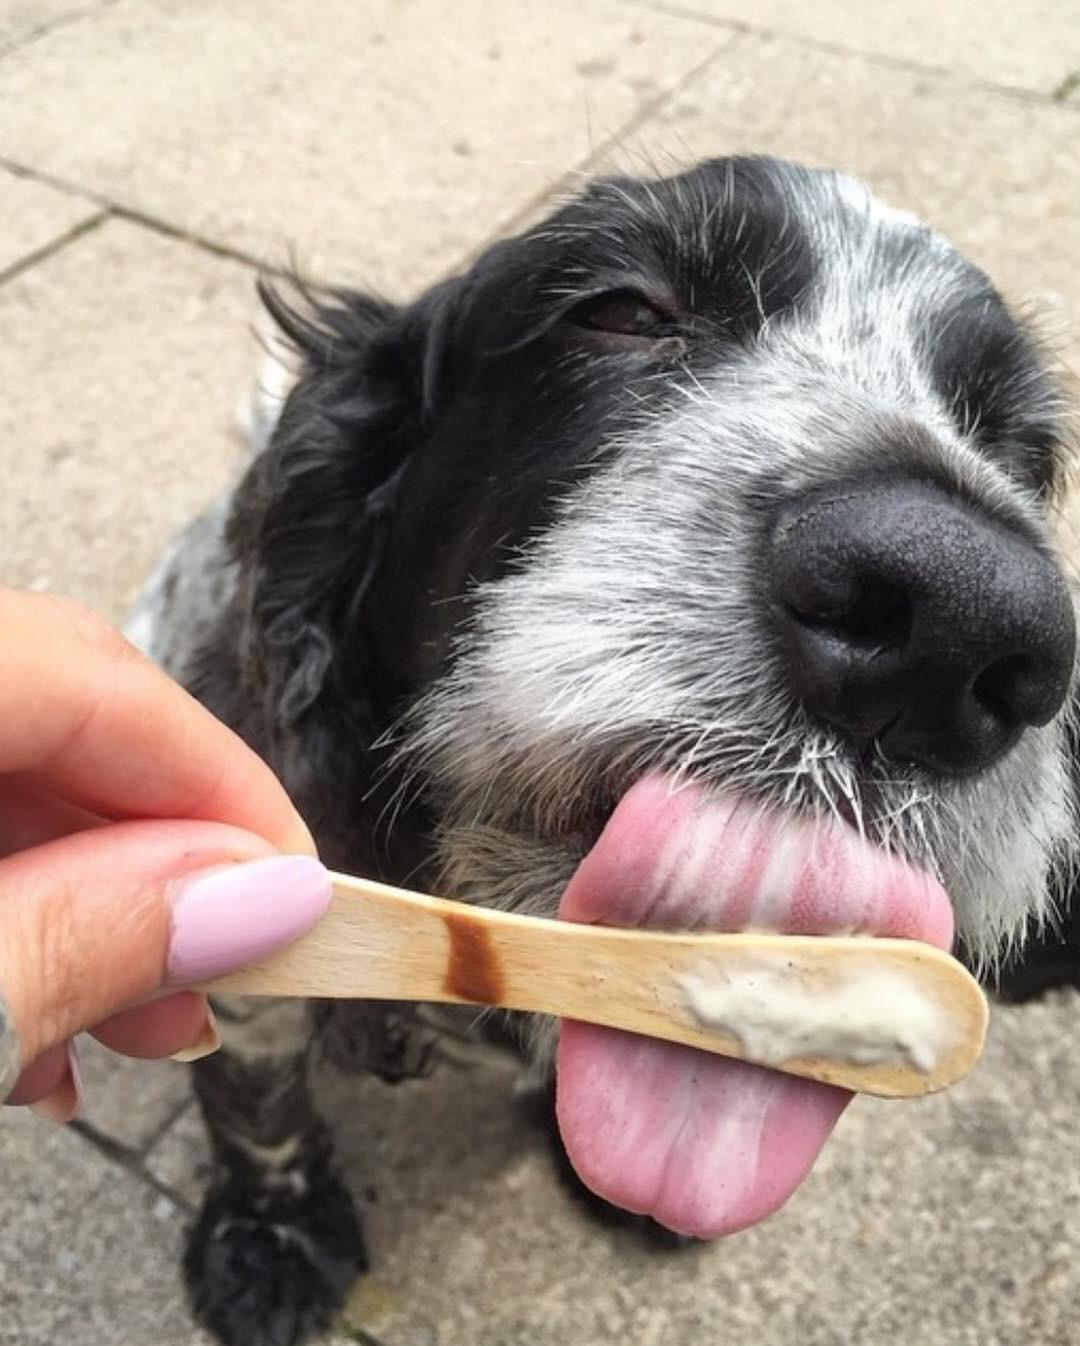 black and white Cocker Spaniel licking the a popsicle stick